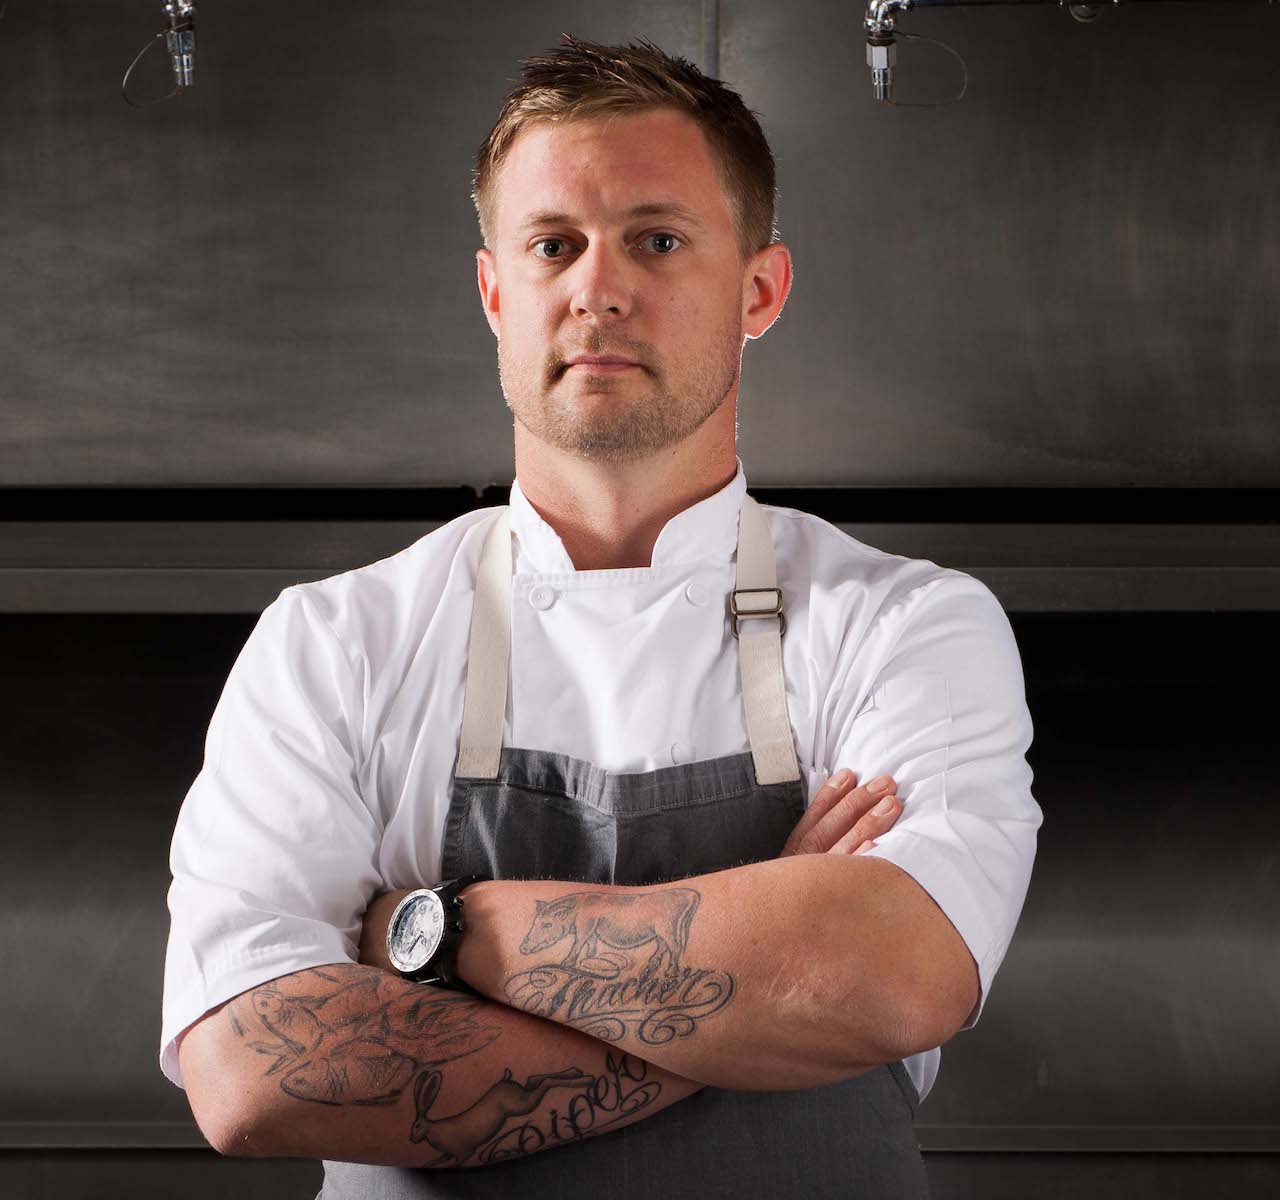 Top Chef alumni Bryan Voltaggio has partnered with Scenic Luxury Cruises for a special 2022 culinary sailing through southern France.